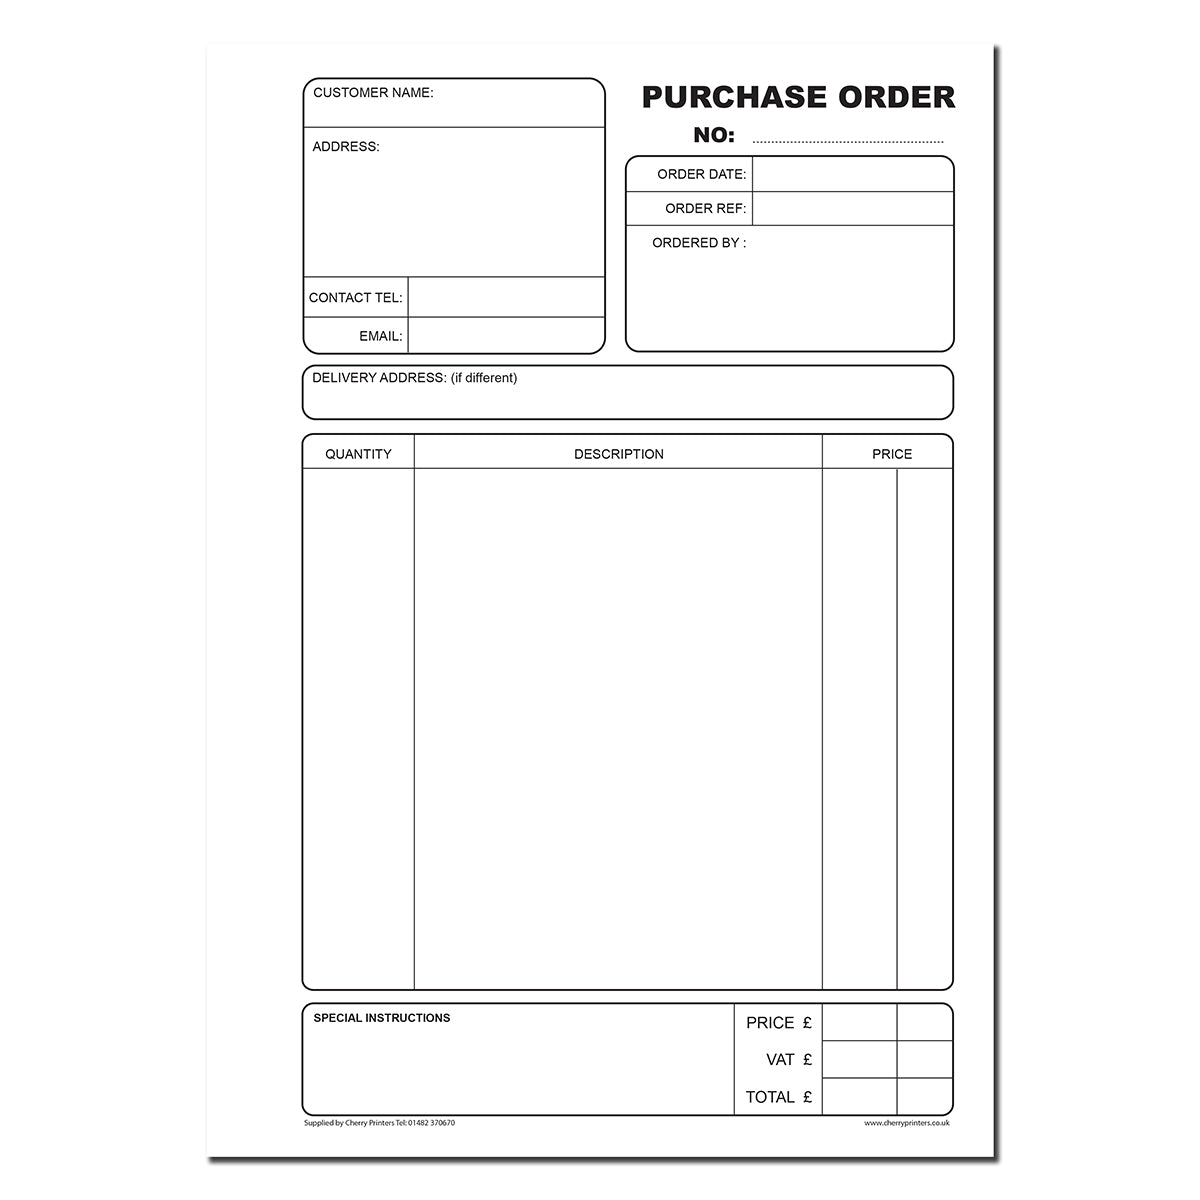 NCR Purchase Order Duplicate Book A4